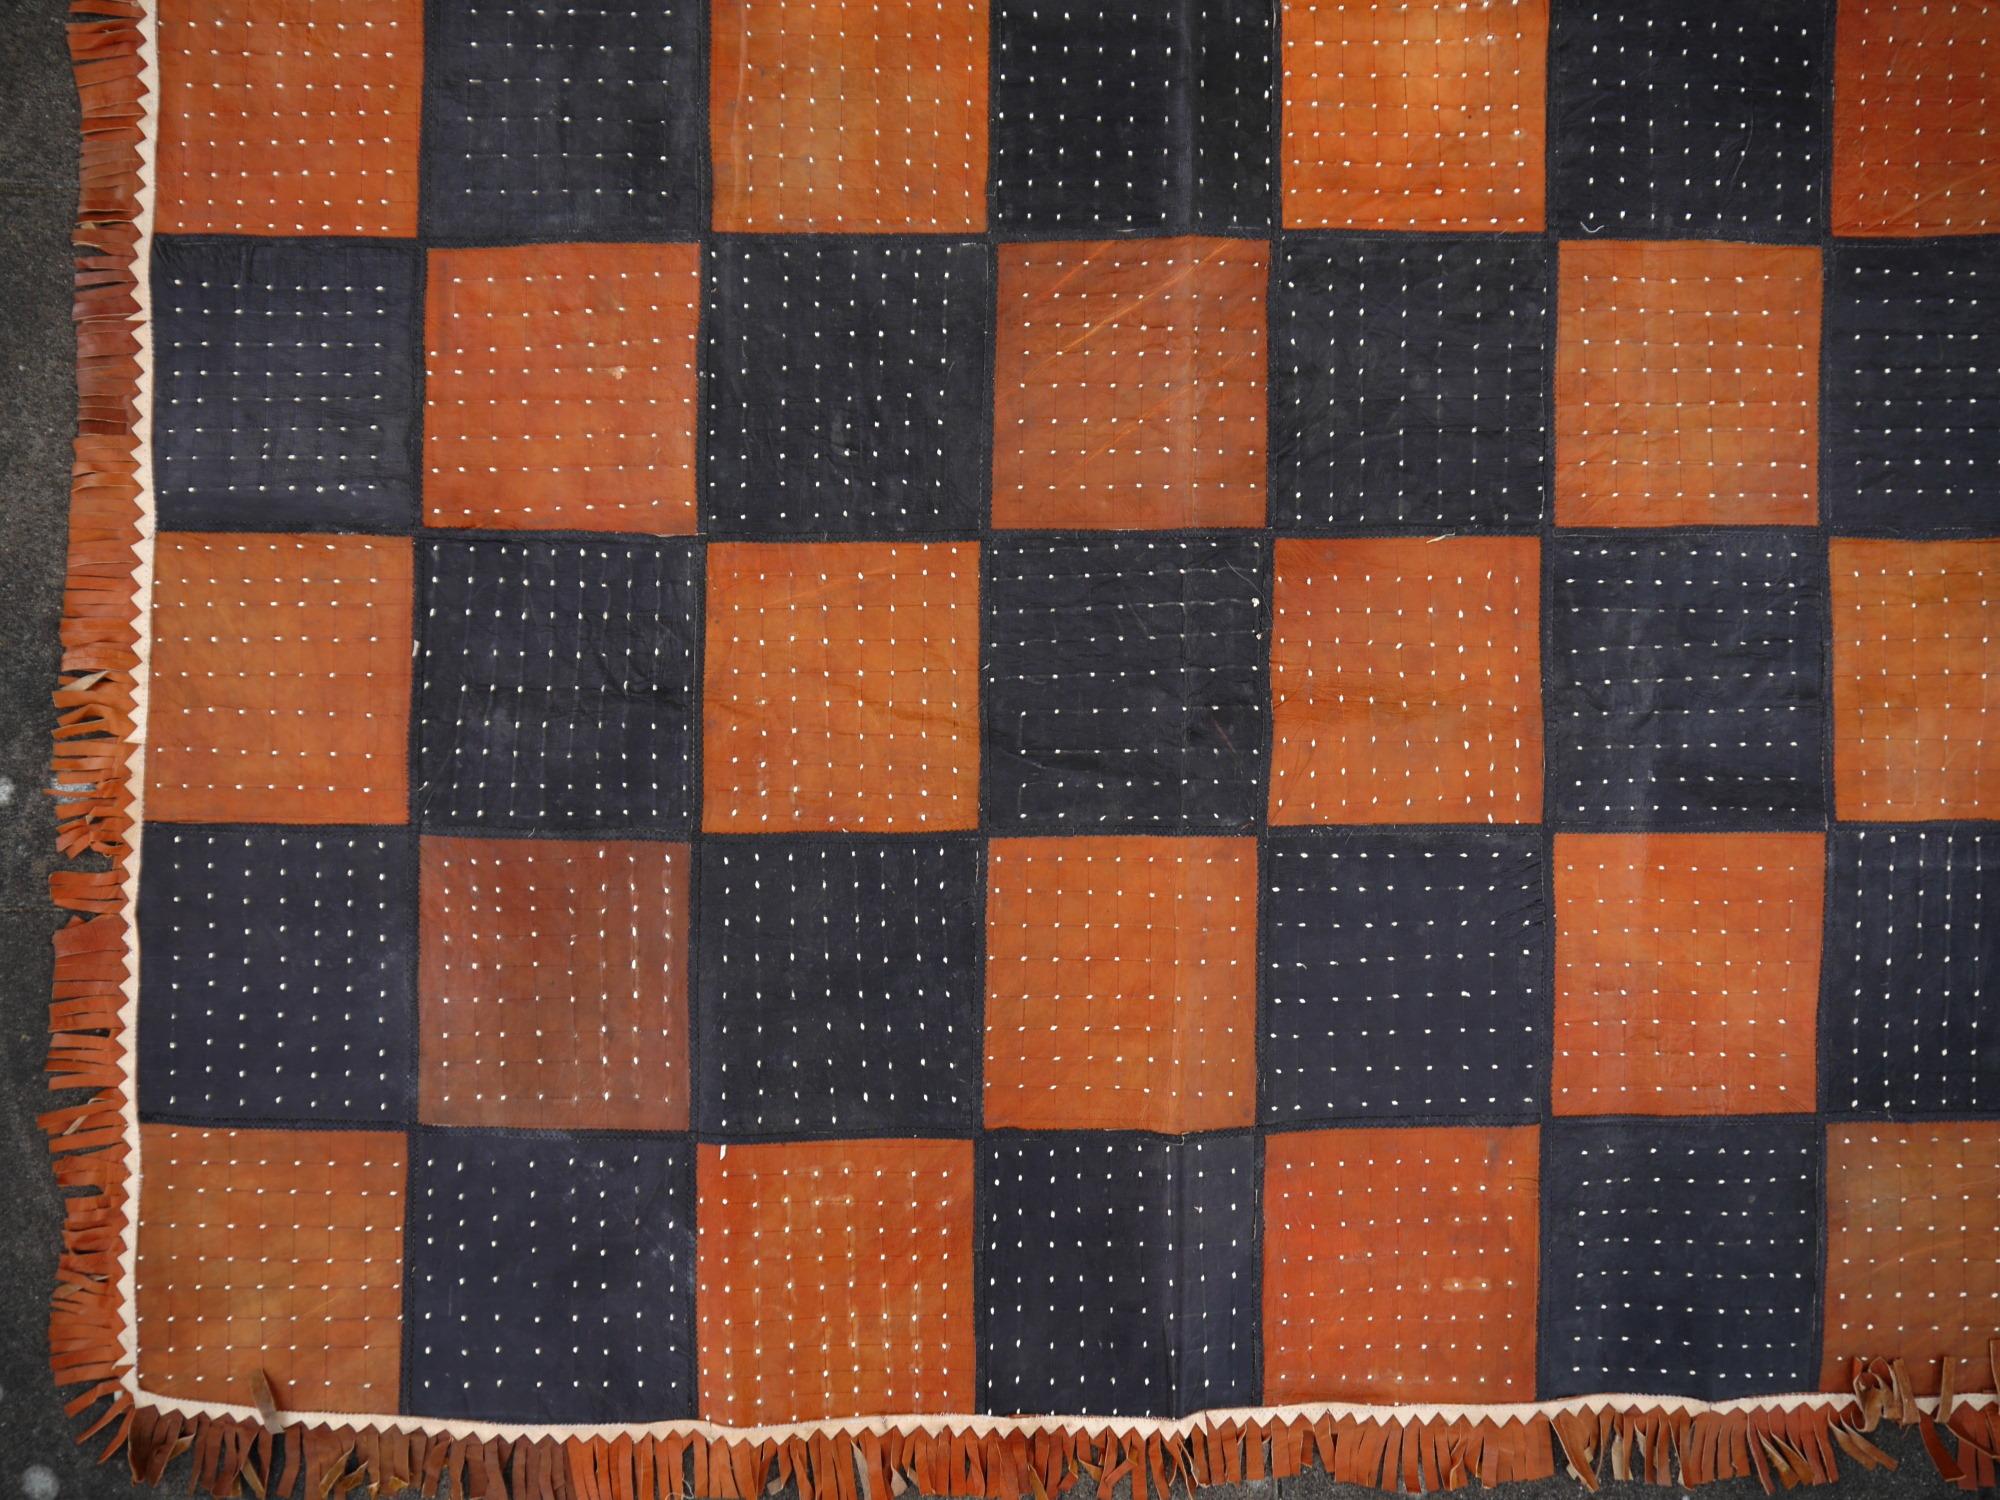 Leather rug checkerboard patchwork black brown Tuareg carpet from Mauretania

A beautiful rug from Mauretania.
• Beautiful colors, very vibrant
• Made of soft goat leather
• Patchwork
• Traditional design, goes well with midcentury, Art Deco,